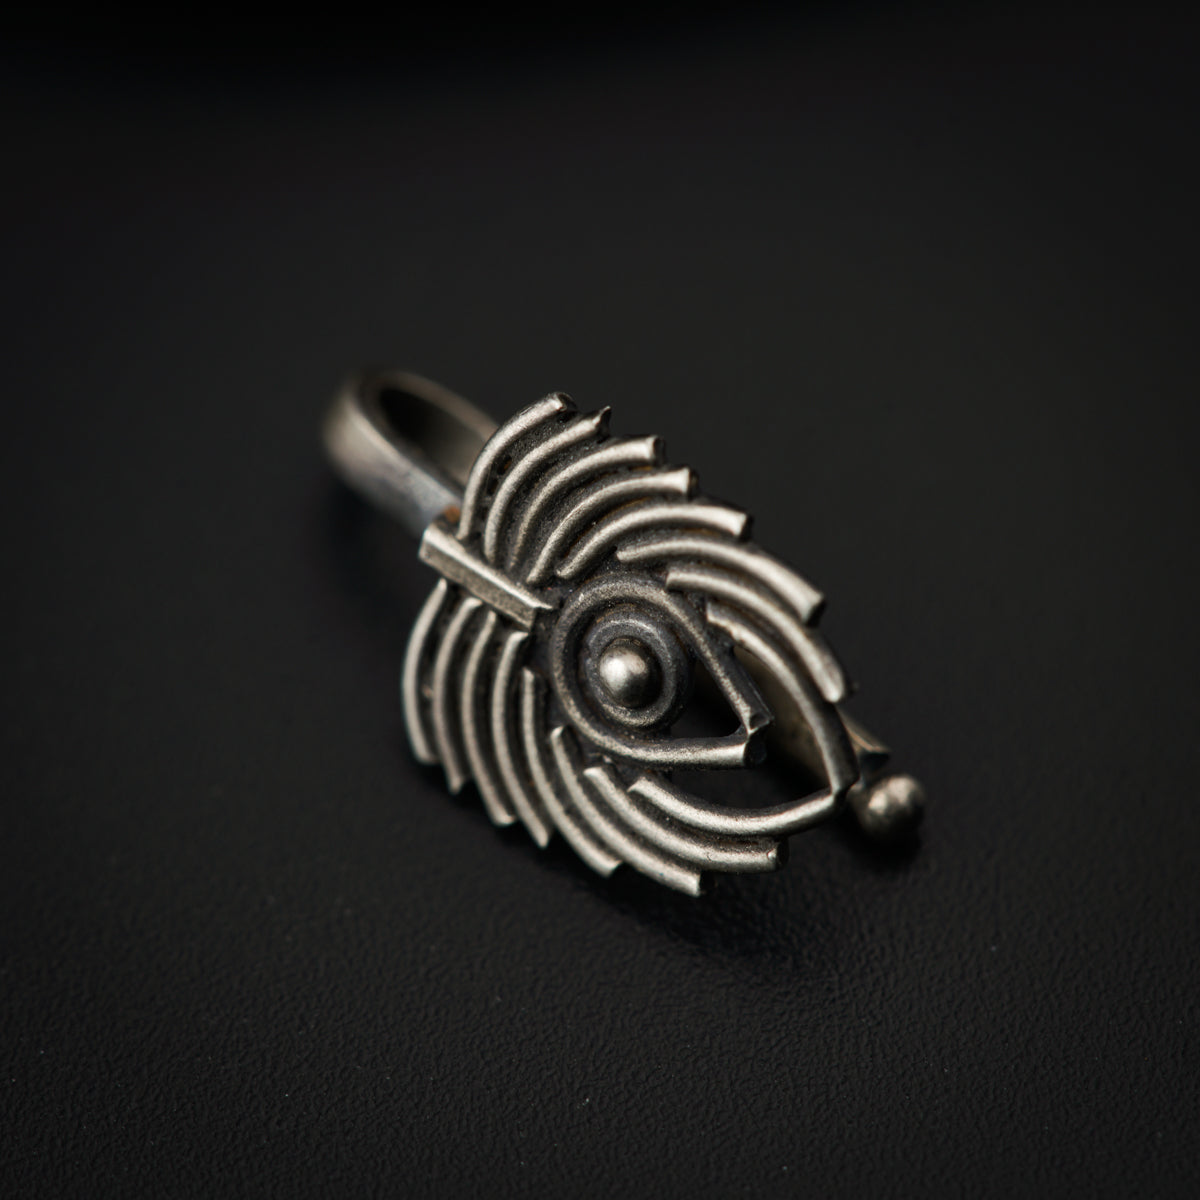 a silver ring with a spiral design on it